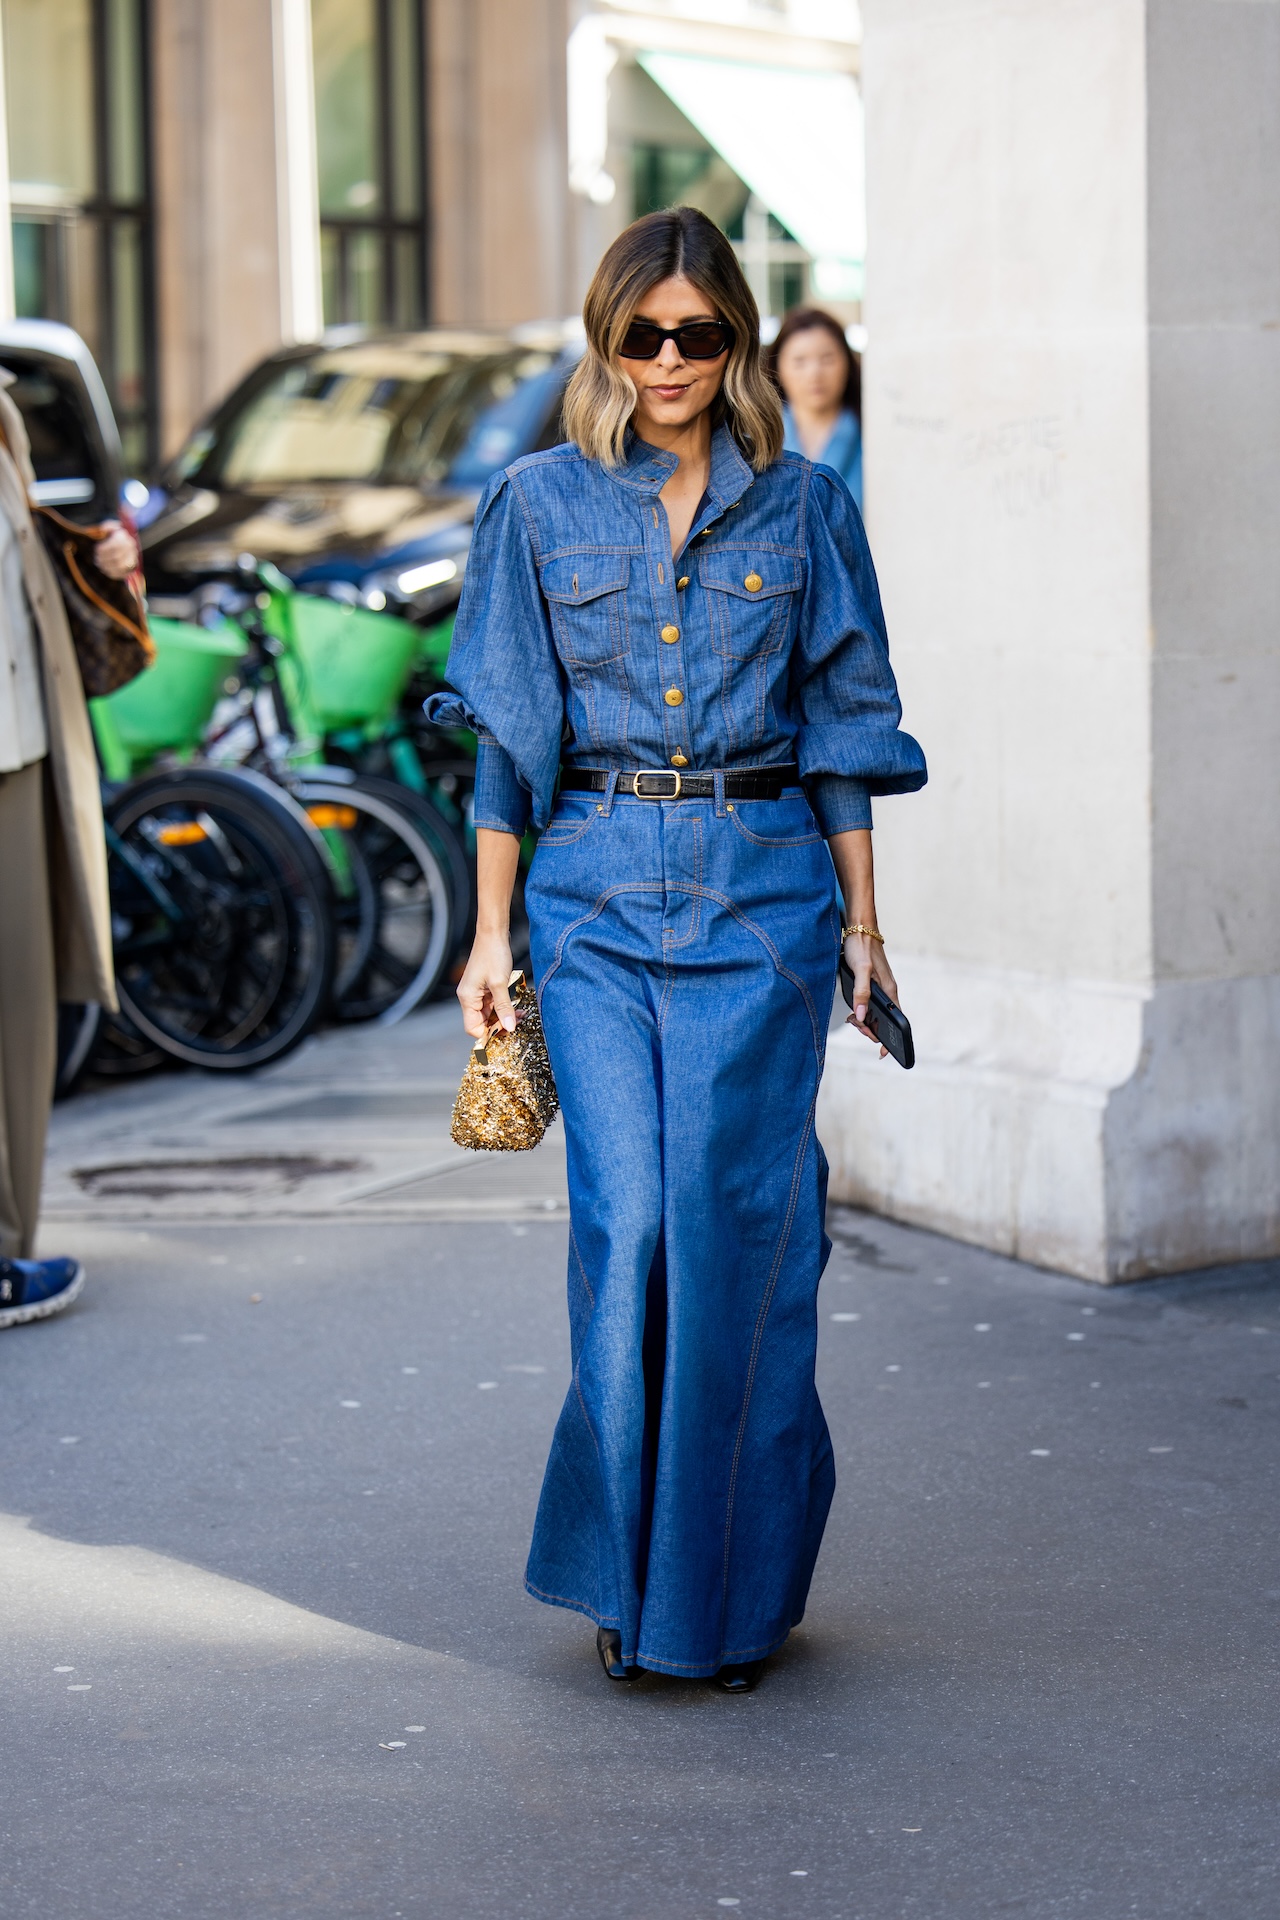 PFW FW24 Street Style: A Mix of 70s & Bold Trends